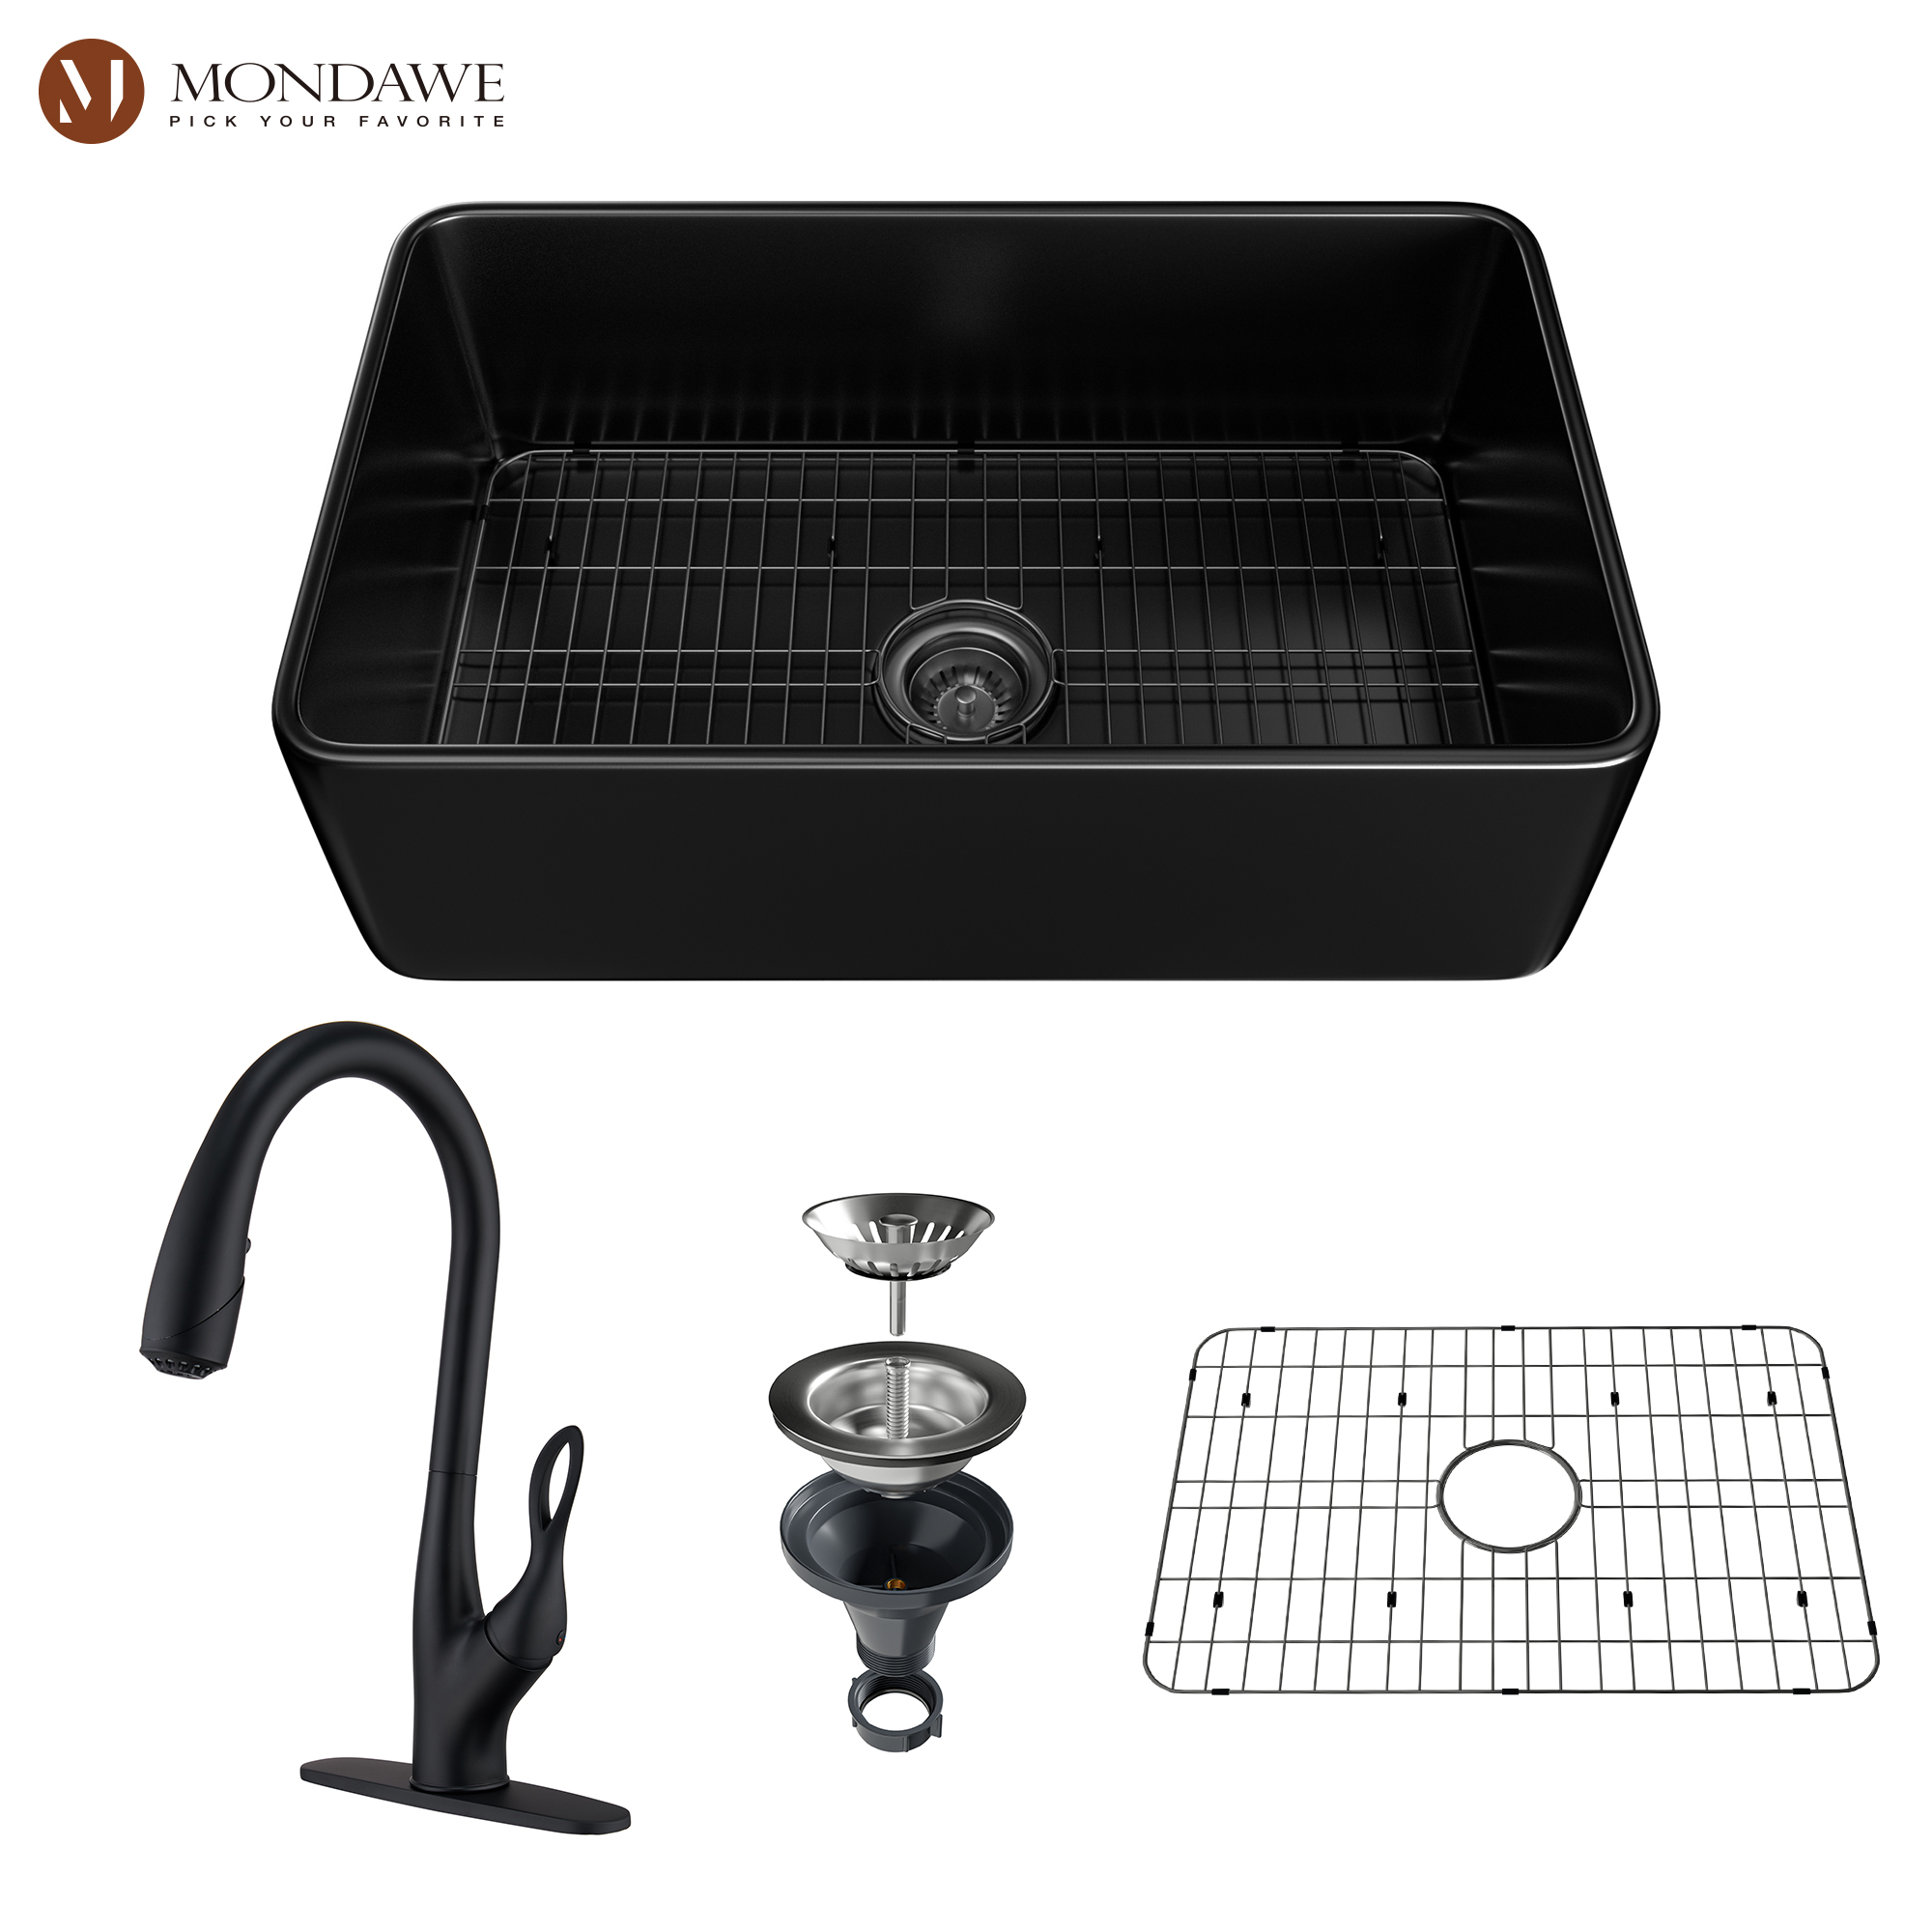 Farmhouse 30 In. Matte Black Single Bowl Fireclay Kitchen Sink Comes With Pull Down Kitchen Faucet-Mondawe